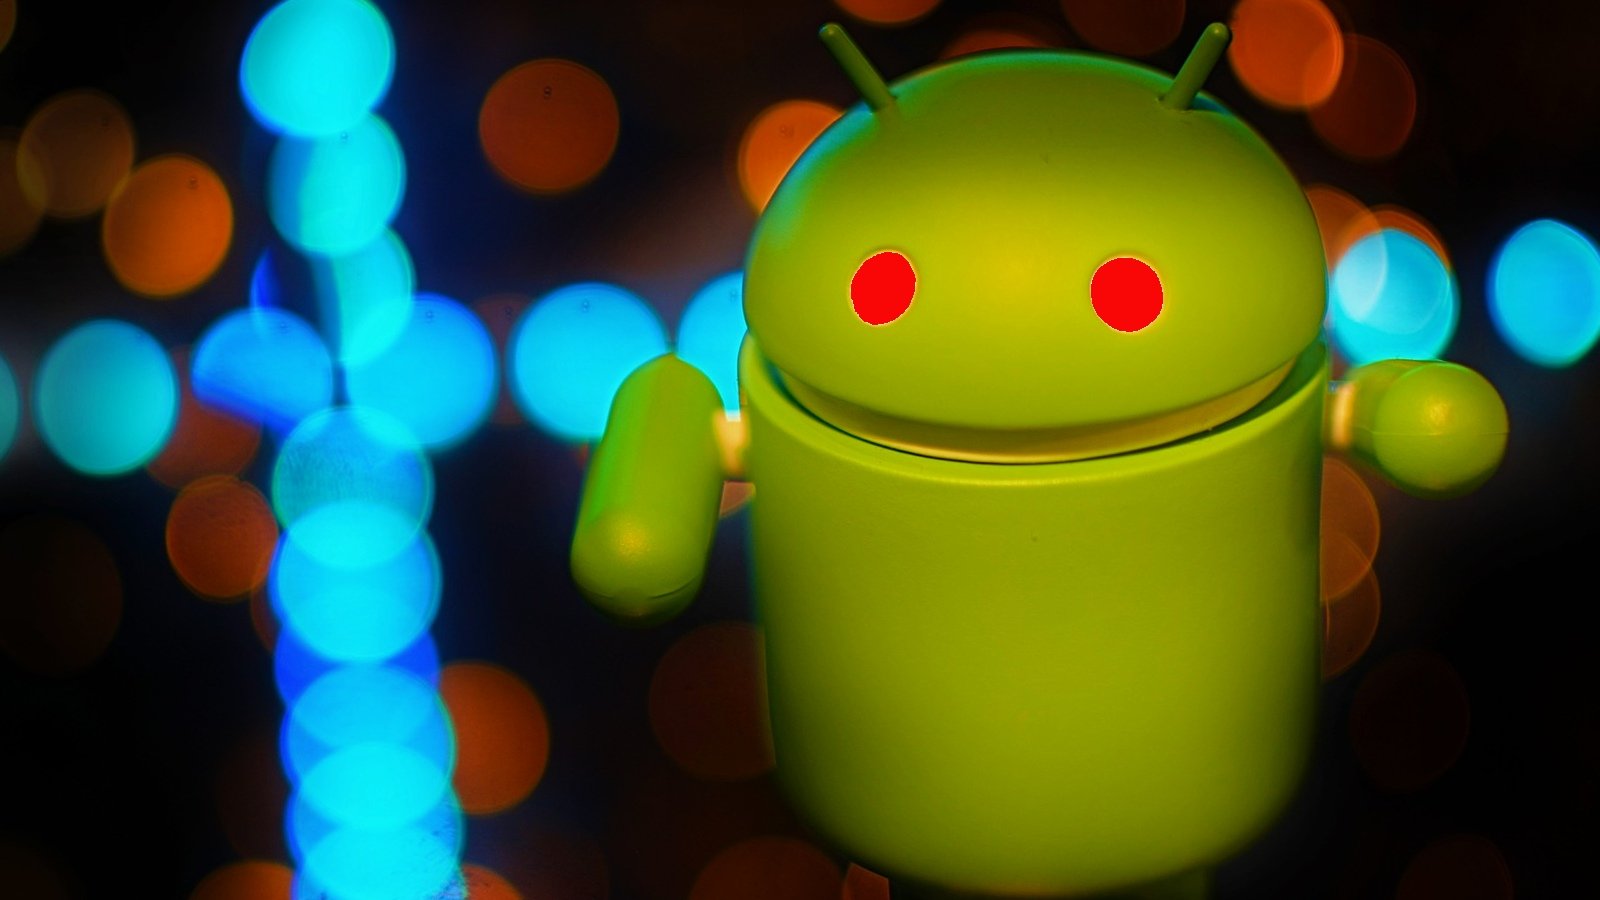 TeaBot malware slips back into Google Play Store to target US users